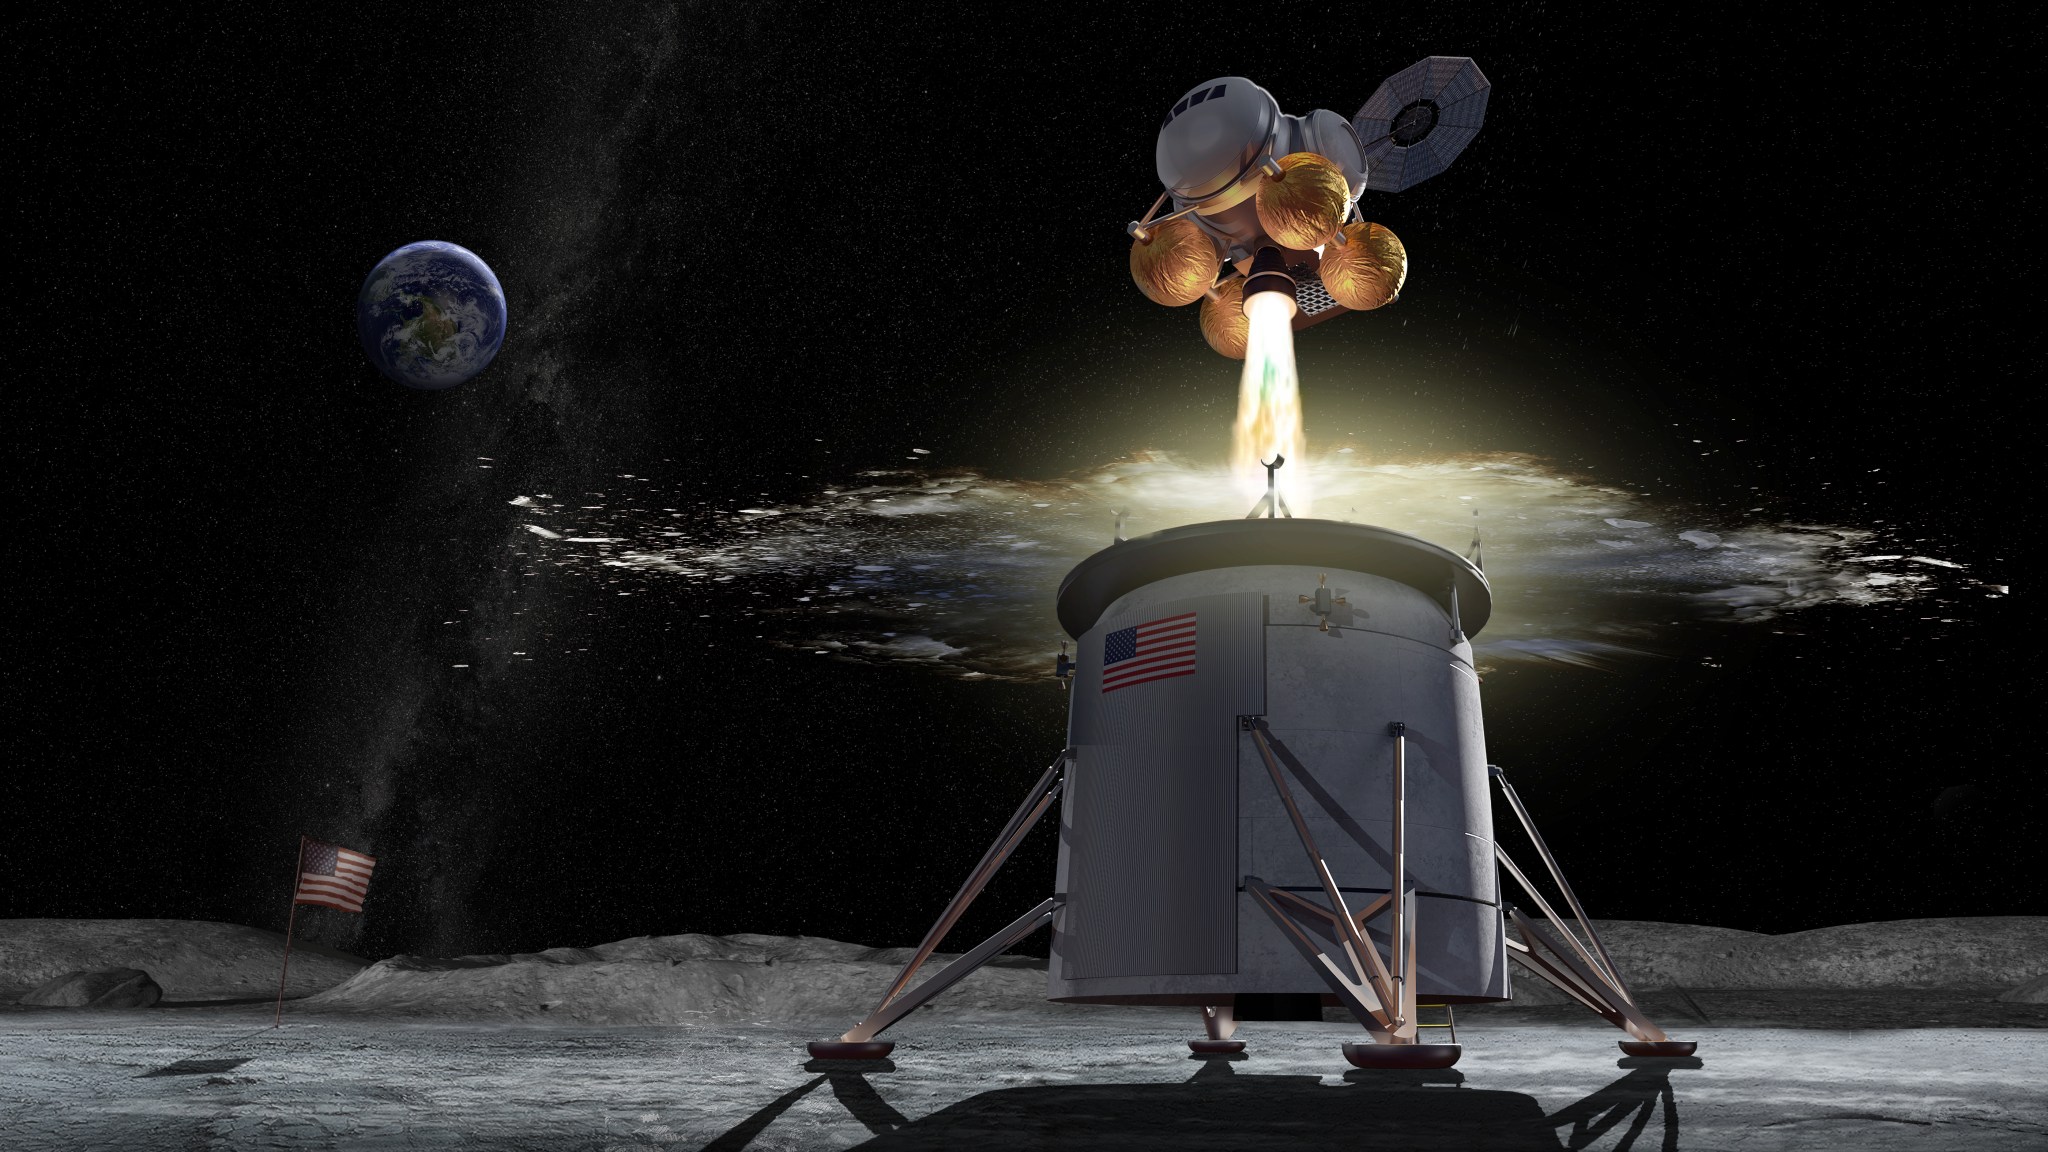 Concept image of ascent vehicle leaving the Moon